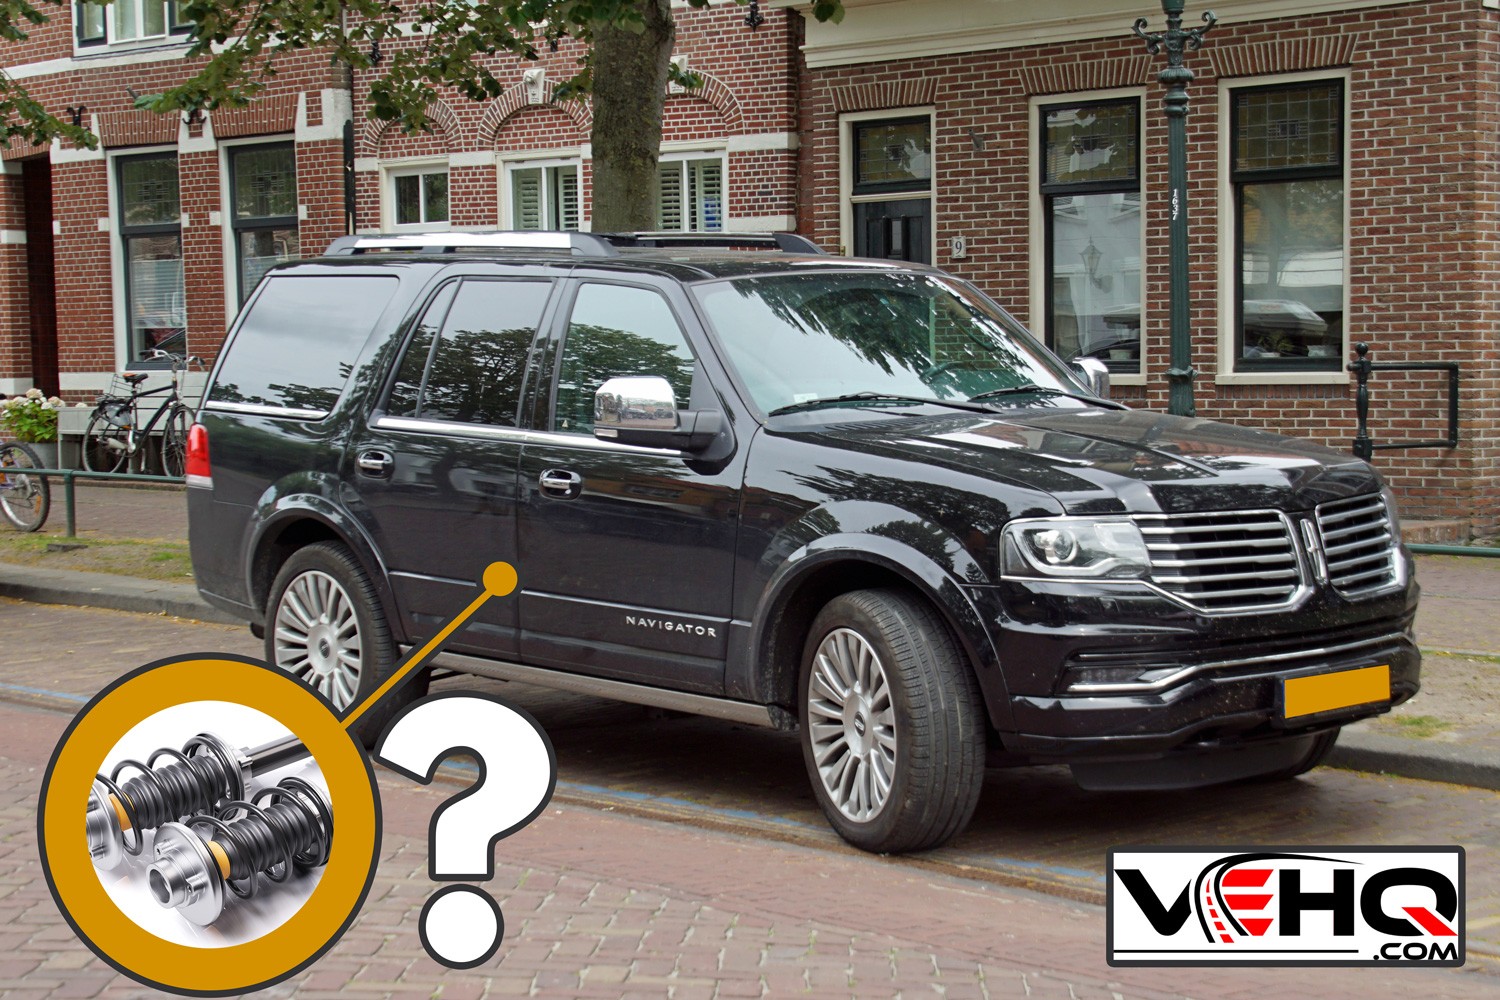 Black Lincoln Navigator parked by the side of the road - Does The Lincoln Navigator Have Air Suspension